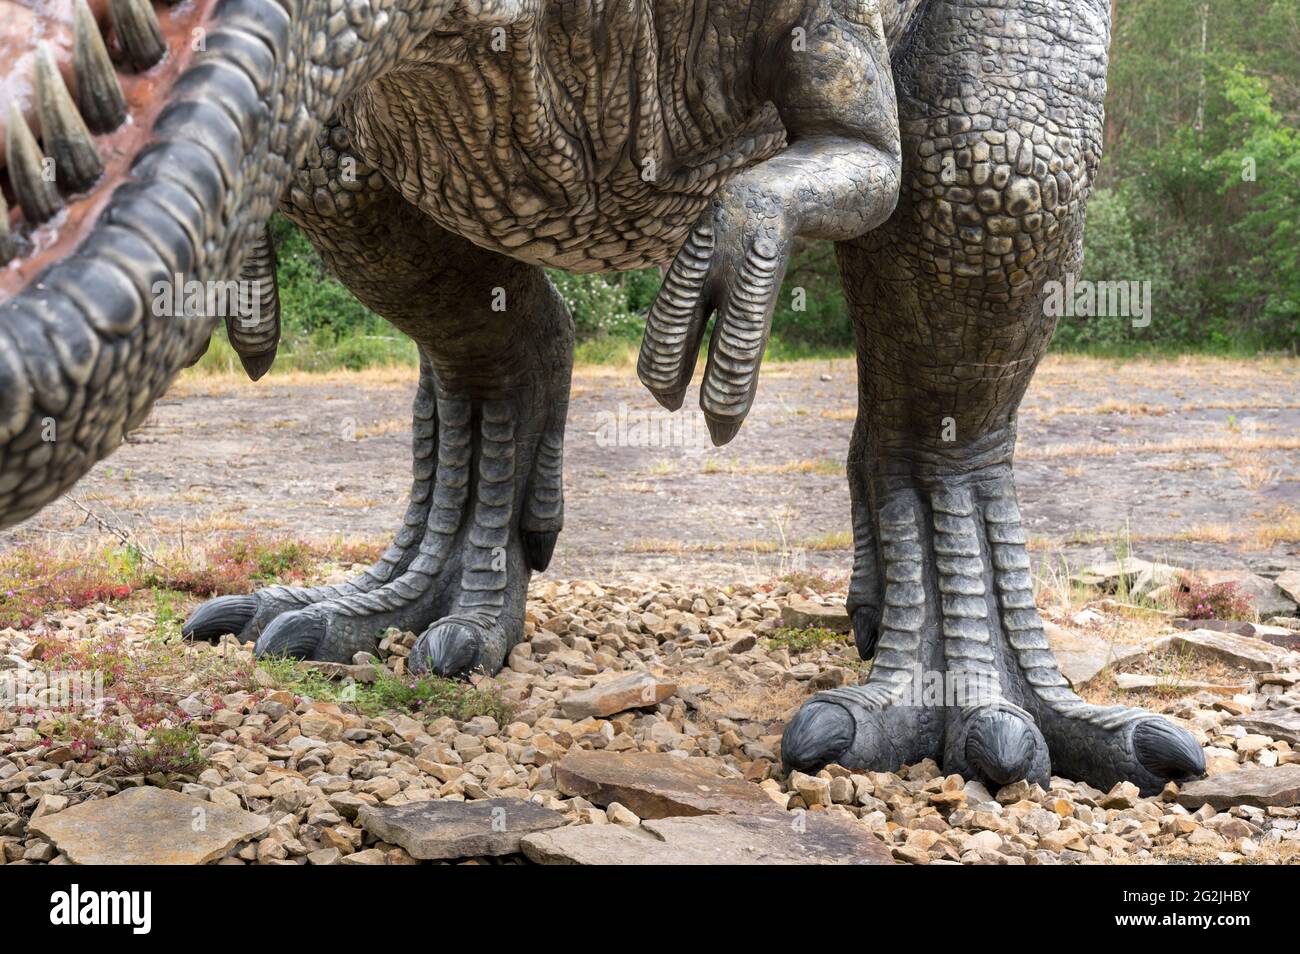 Dinosaur Tyrannosaurus as a model in Dinopark Münchehagen near Hanover. Lived in North America about 66 million years ago, was about 13m long and weighed 6t. Model: Wild Creations UK / Universal Pictures DE Stock Photo